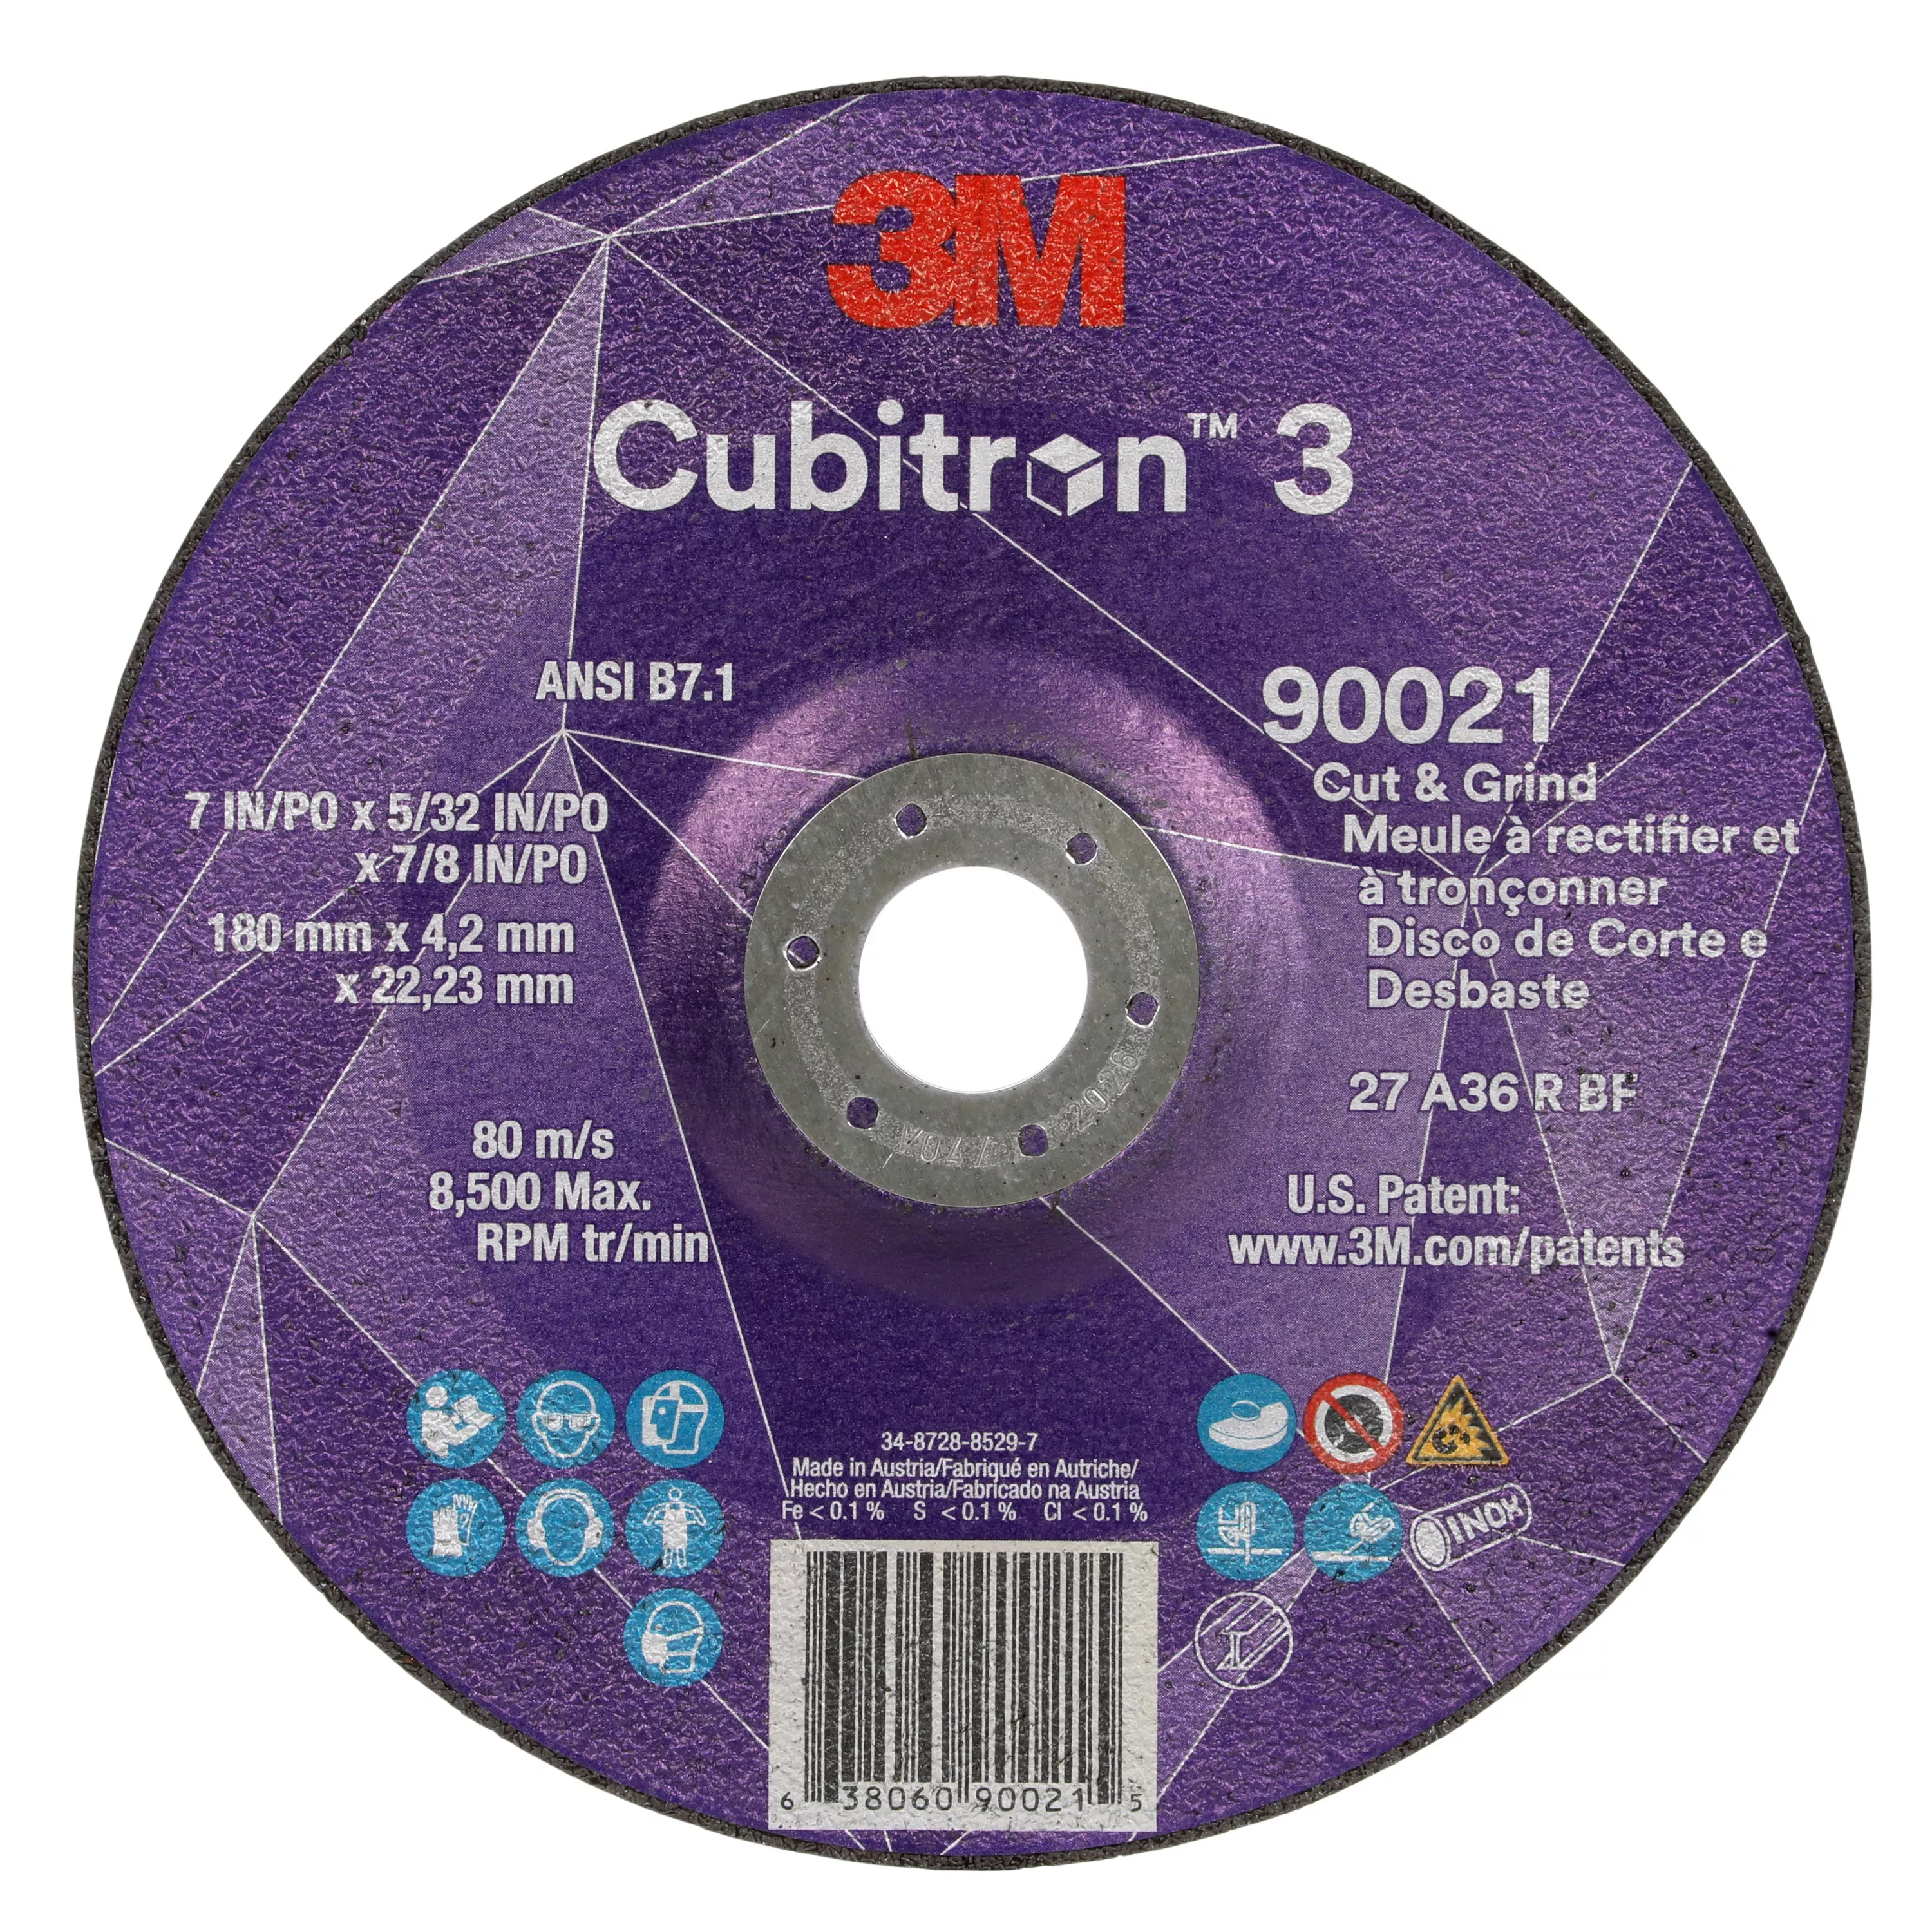 3M™ Cubitron™ 3 Cut and Grind Wheel, 90021, 36+, T27, 7 in x 5/32 in x
7/8 in (180 x 4.2 x 22.23 mm), ANSI, 10/Pack, 20 ea/Case